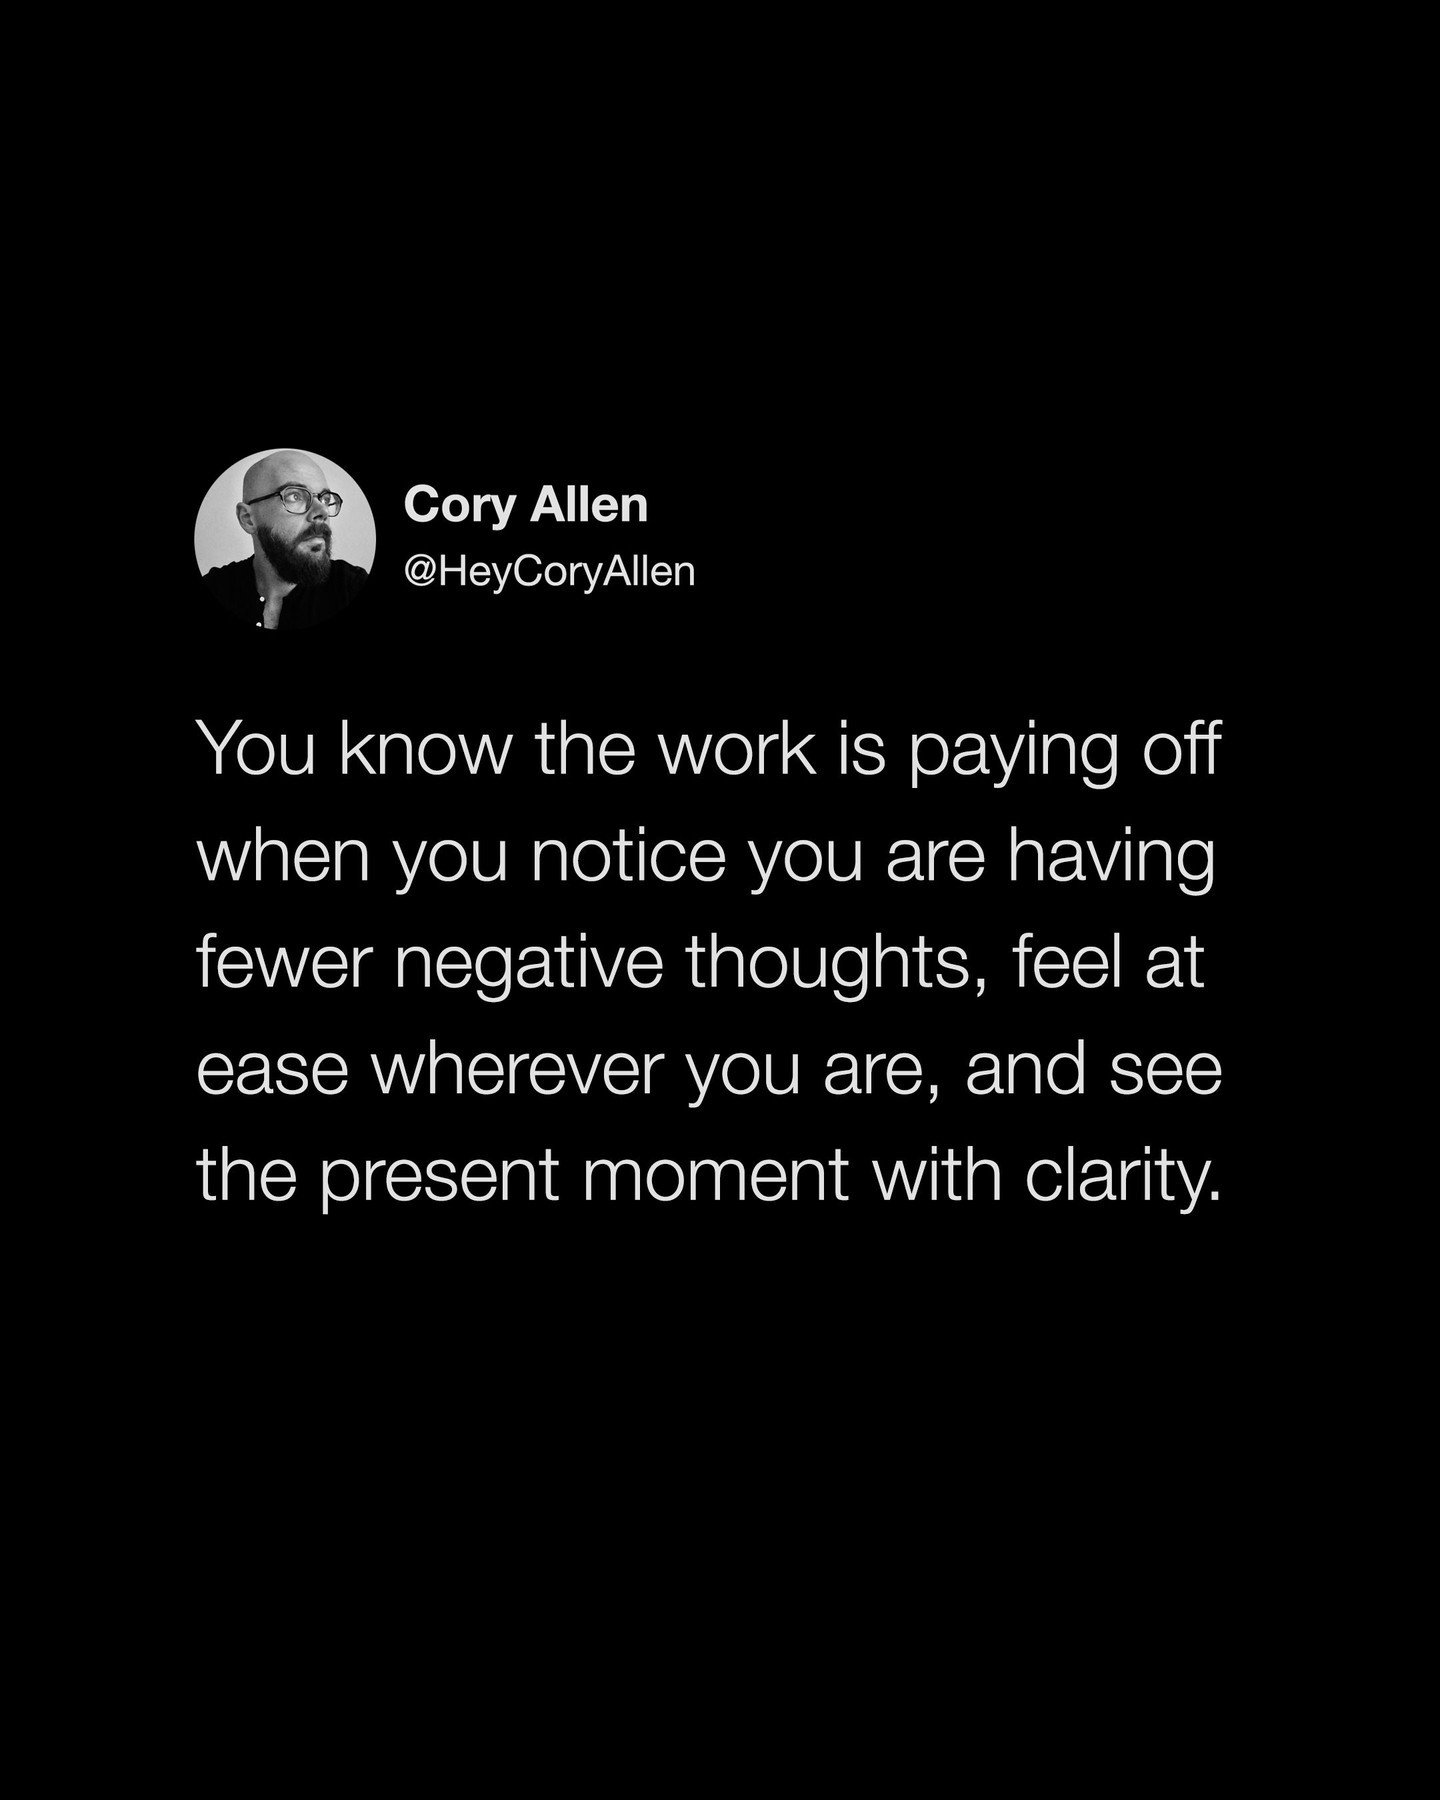 Drop a 🖤 if you feel this. 

@heycoryallen: You know the work is paying off when you notice you&rsquo;re having fewer negative thoughts, feel at ease wherever you are, and see the present moment with clarity.